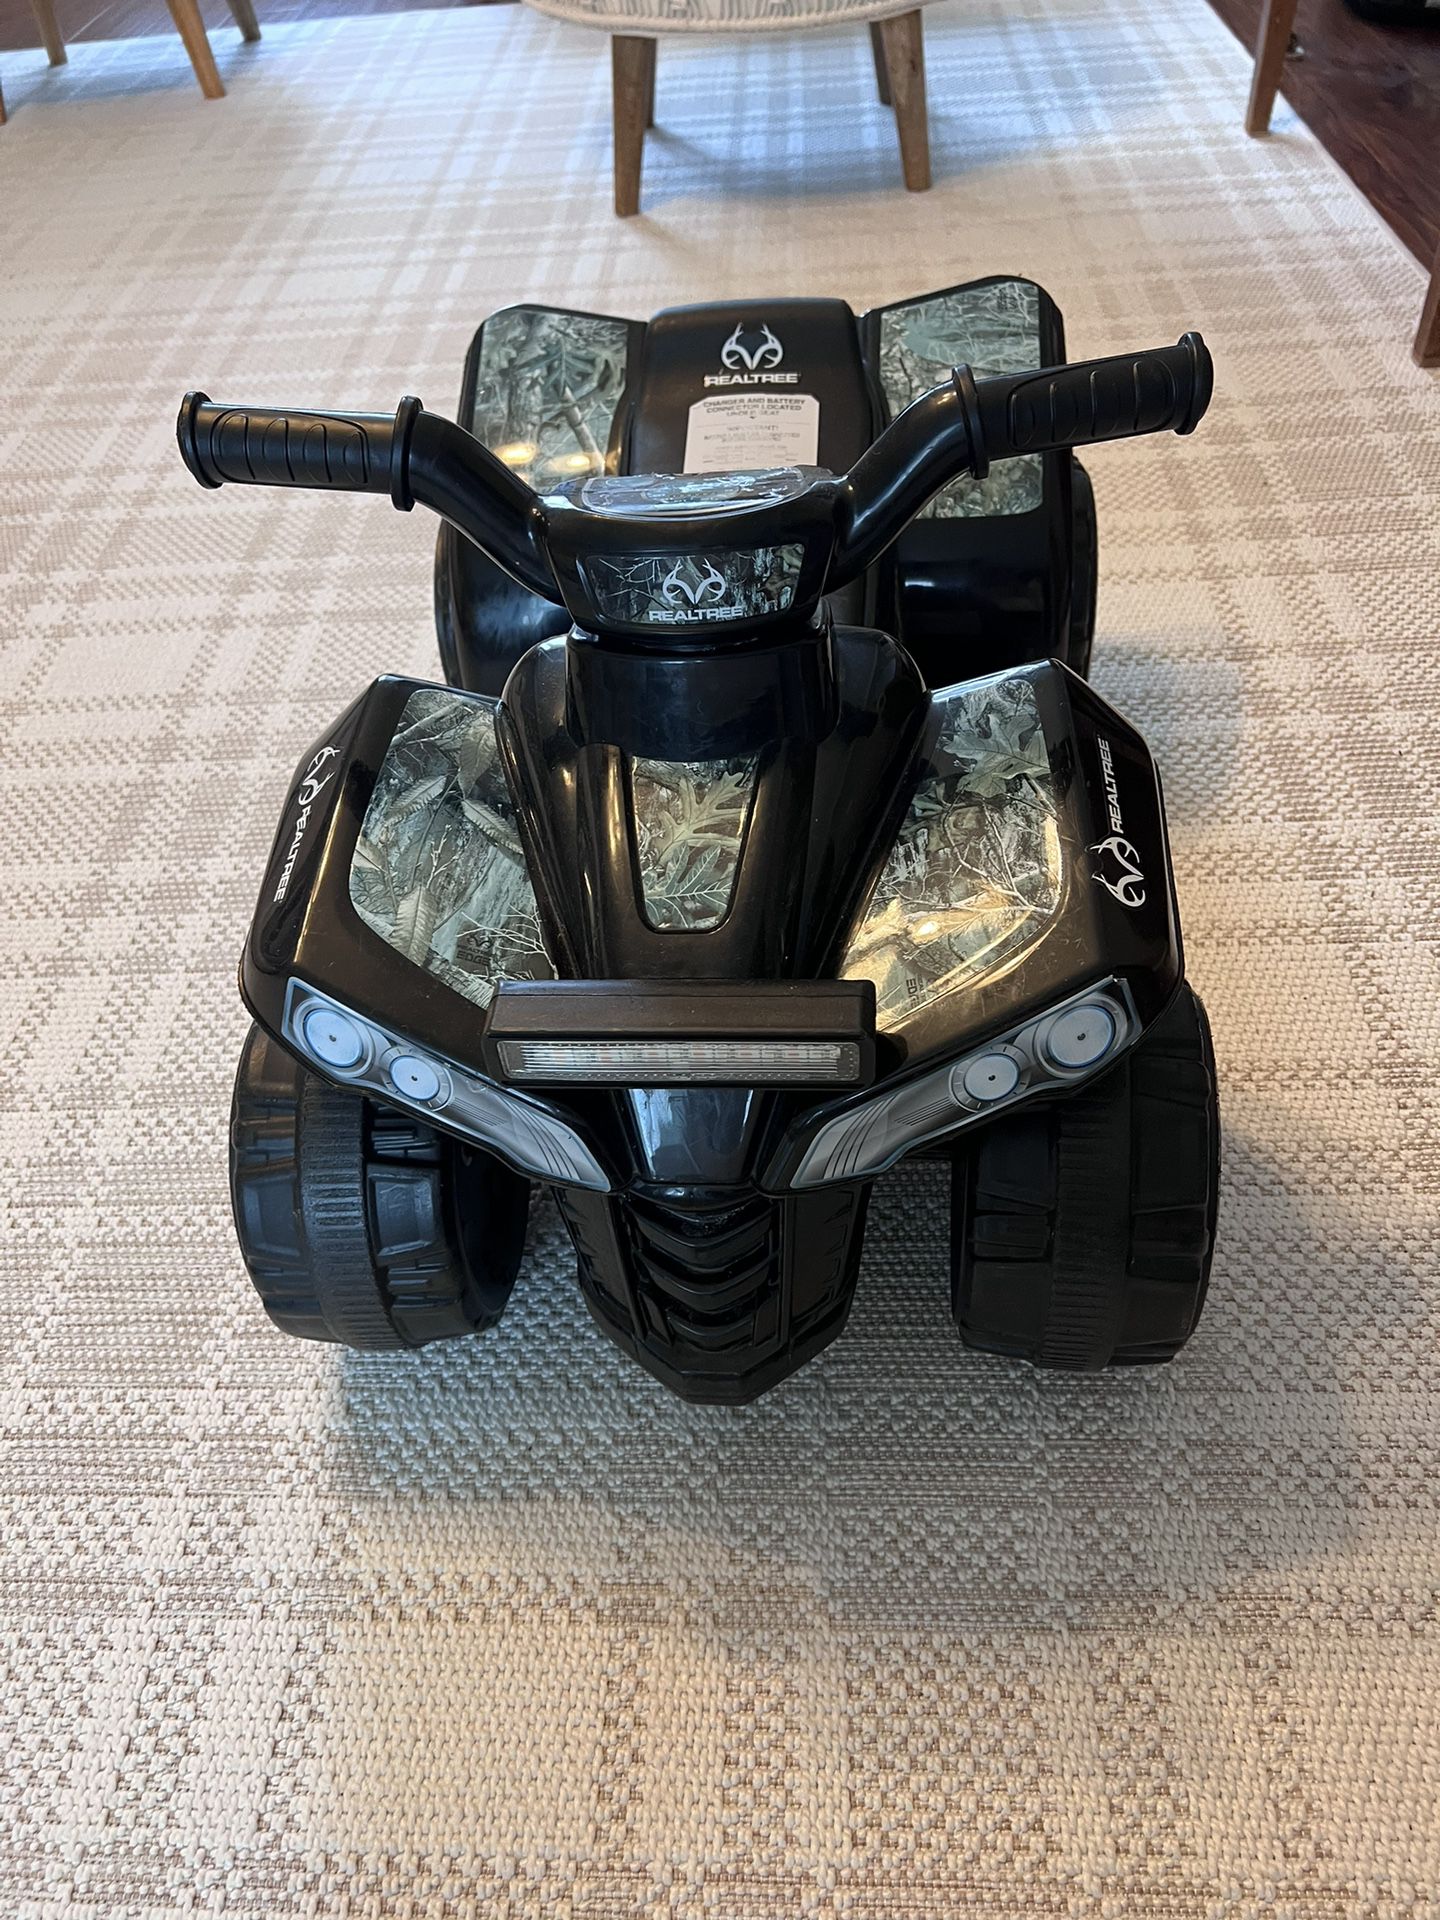 Dynacraft Realtree 6-Volt Boys Kids Ride-on For Age 1.5-3 Years